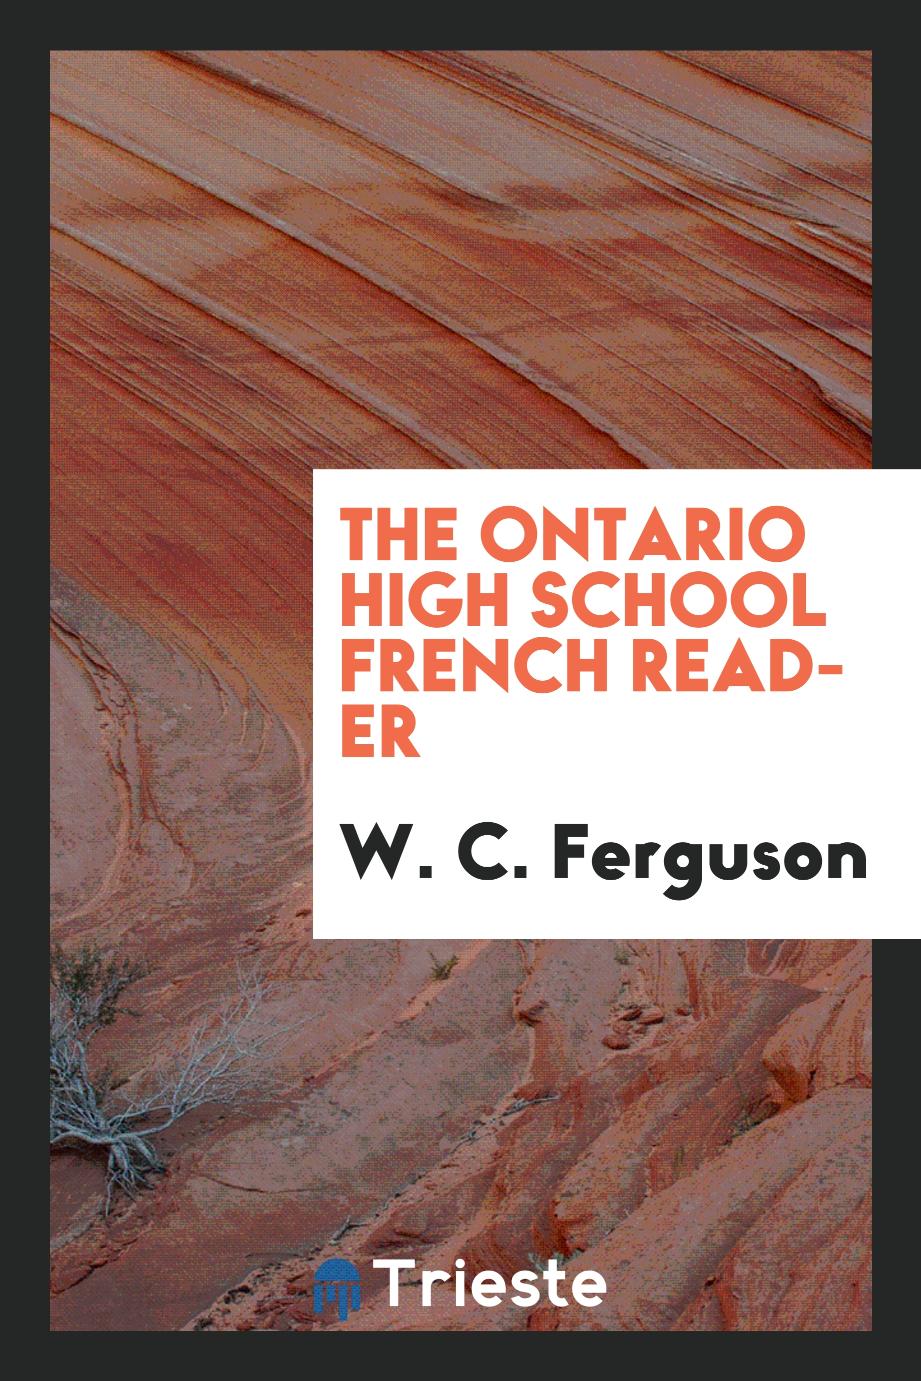 The Ontario High School French Reader